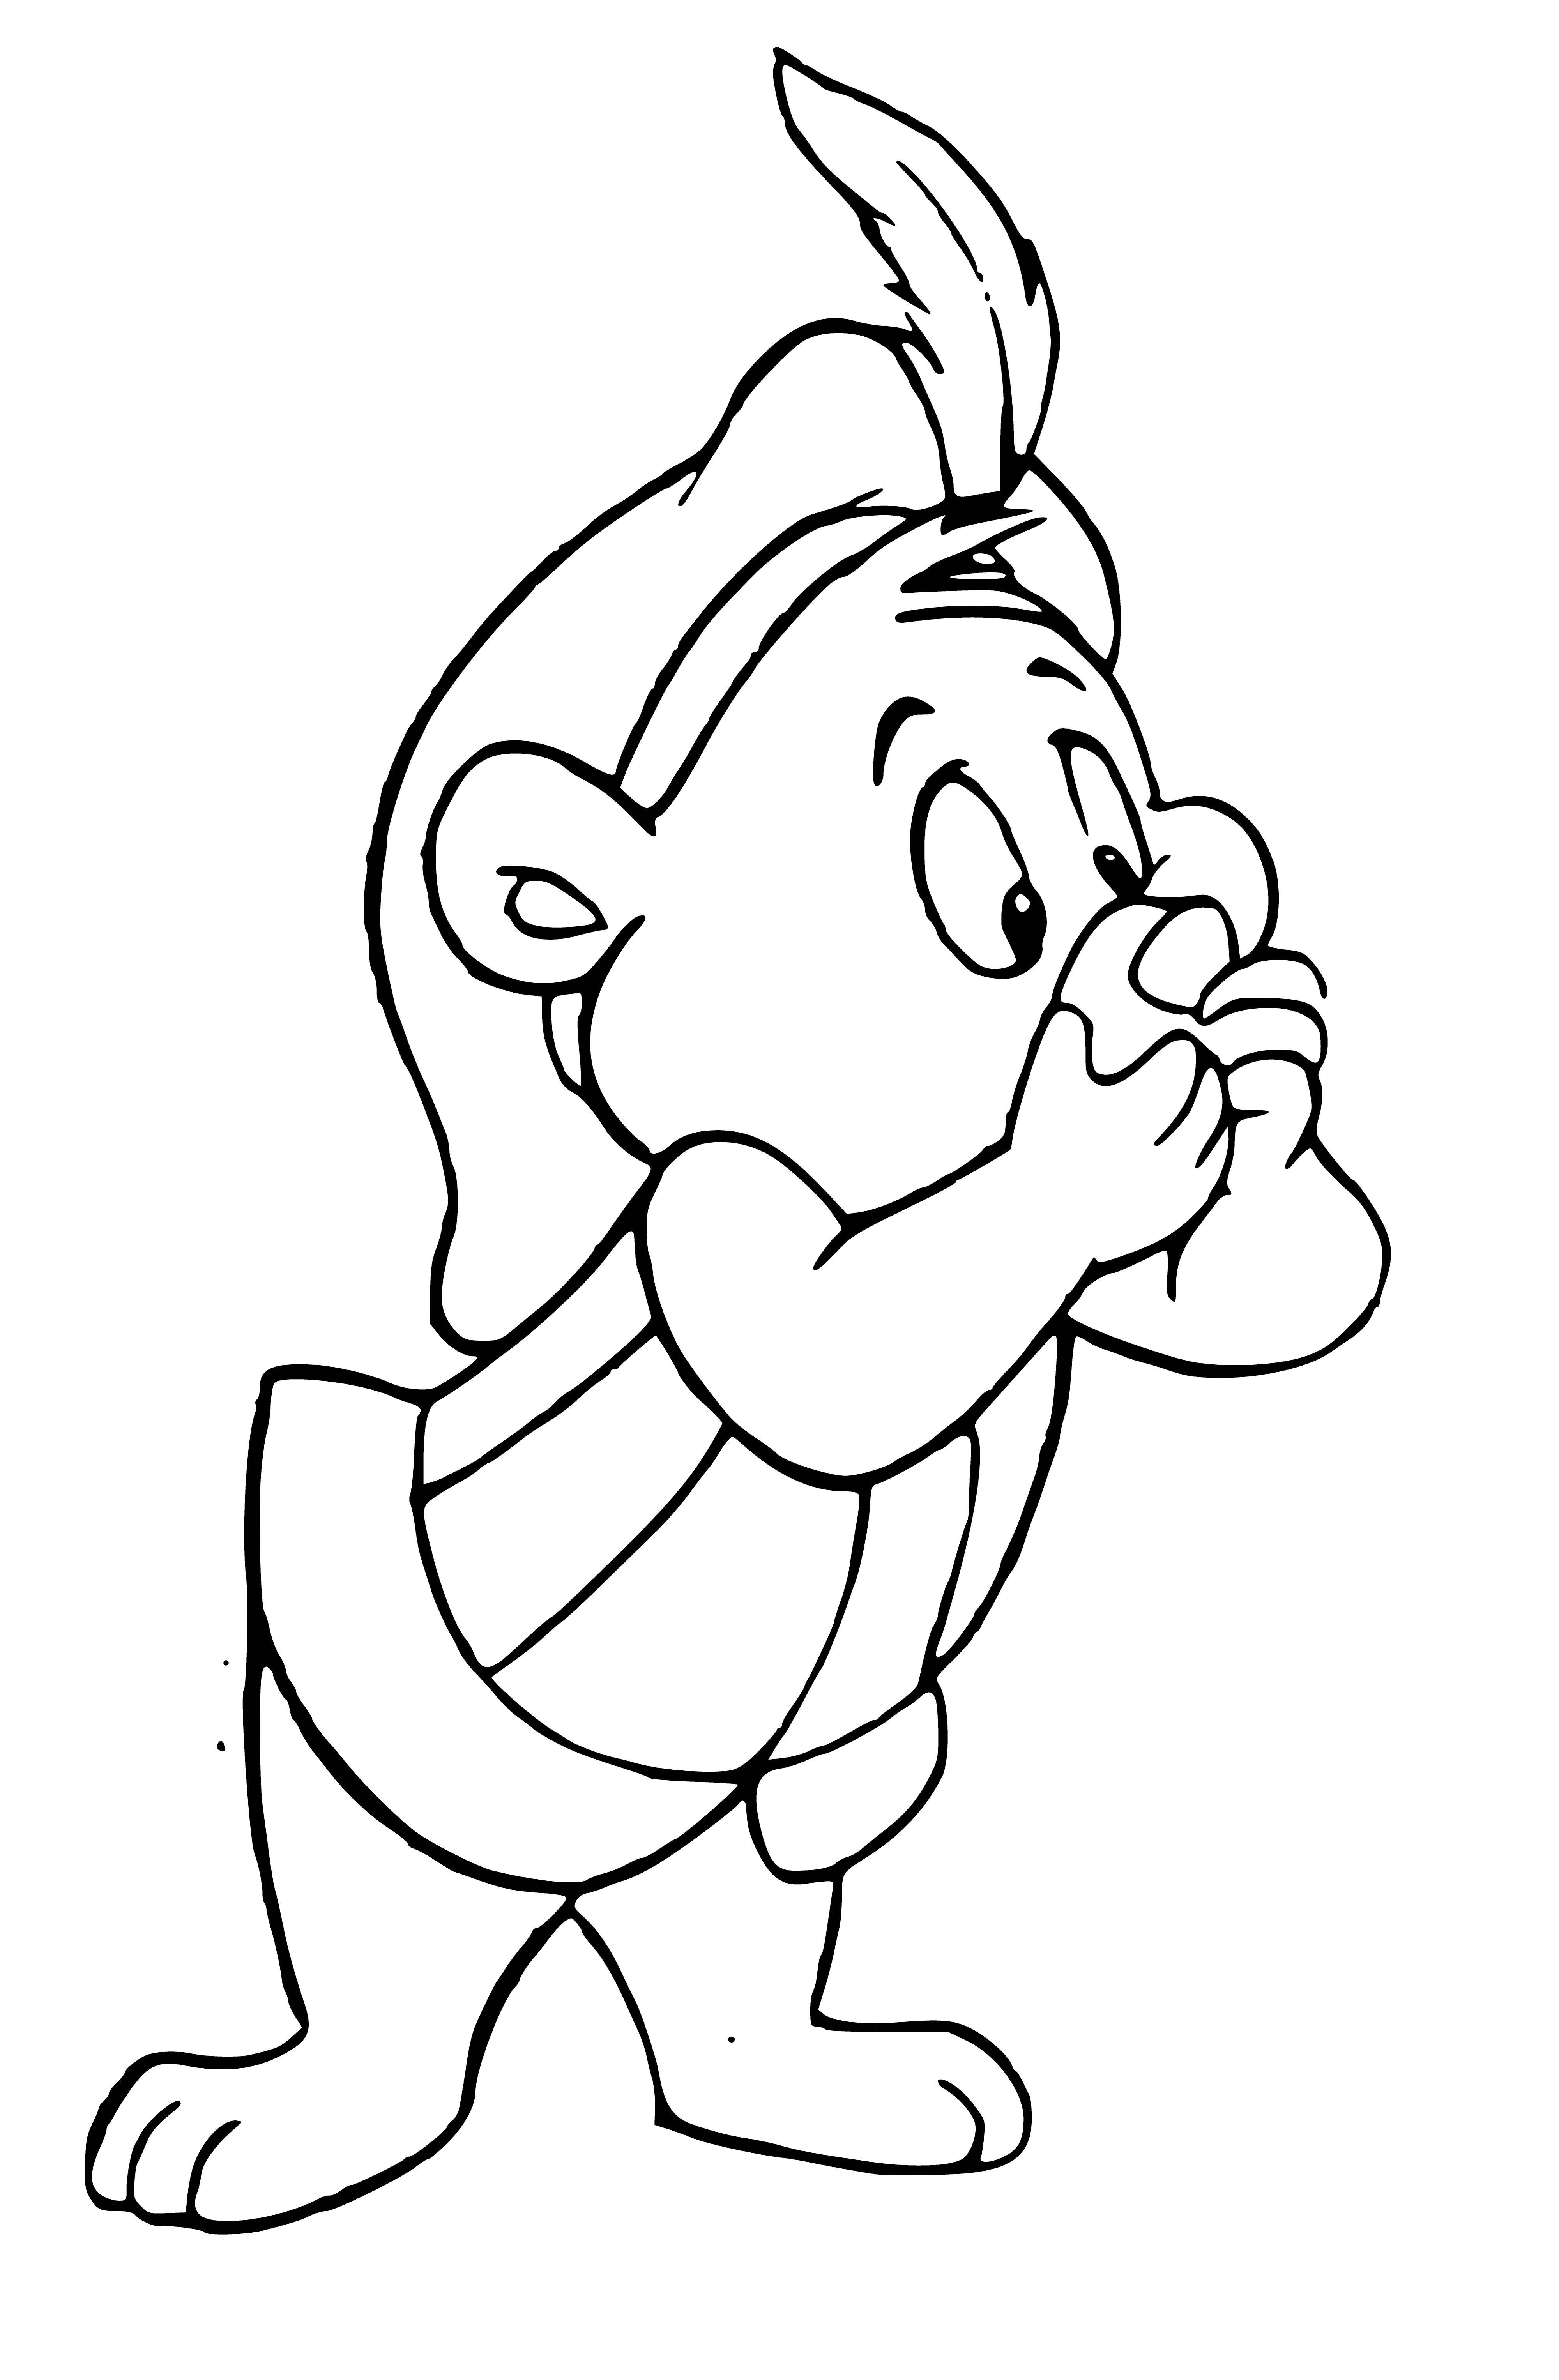 coloring page: Gummi Bears are gummy bears coated in sugar crystals that come in various colors and all share the same flavor.